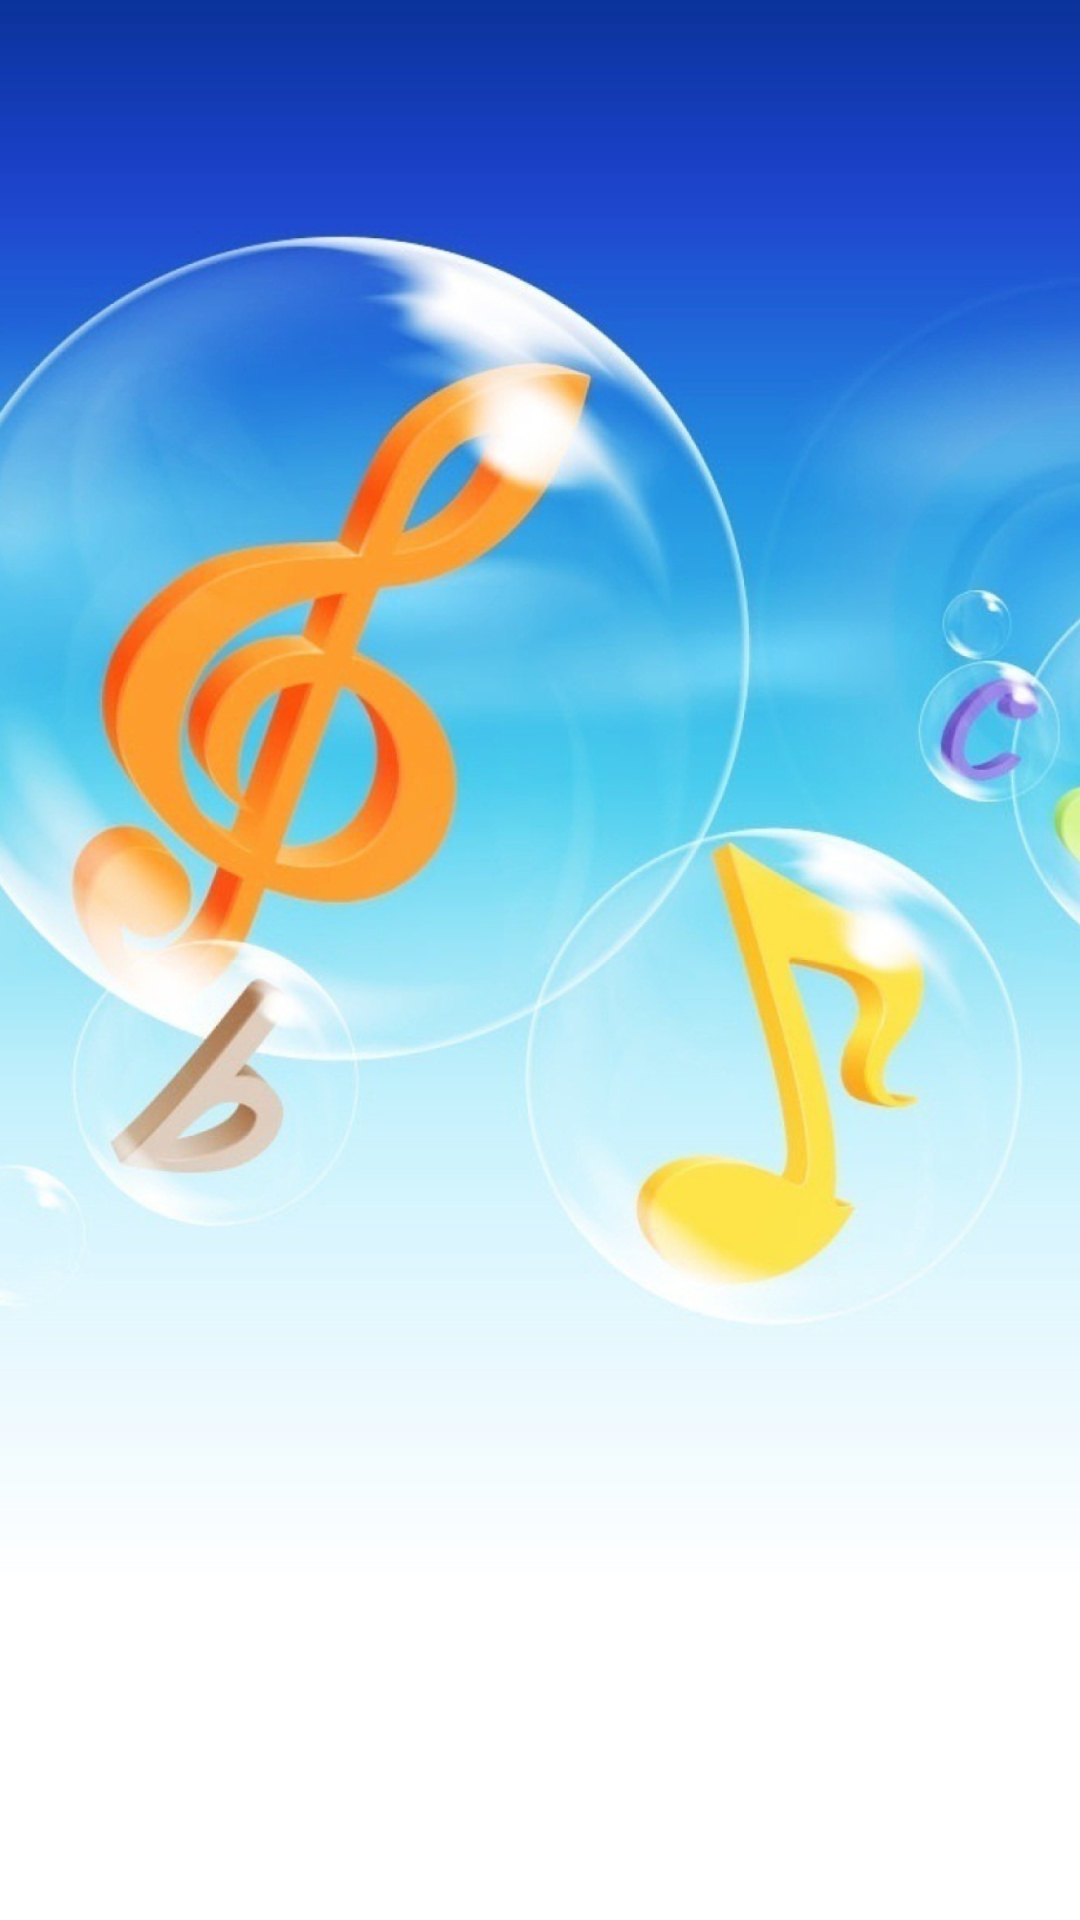 Musical Notes In Bubbles screenshot #1 1080x1920